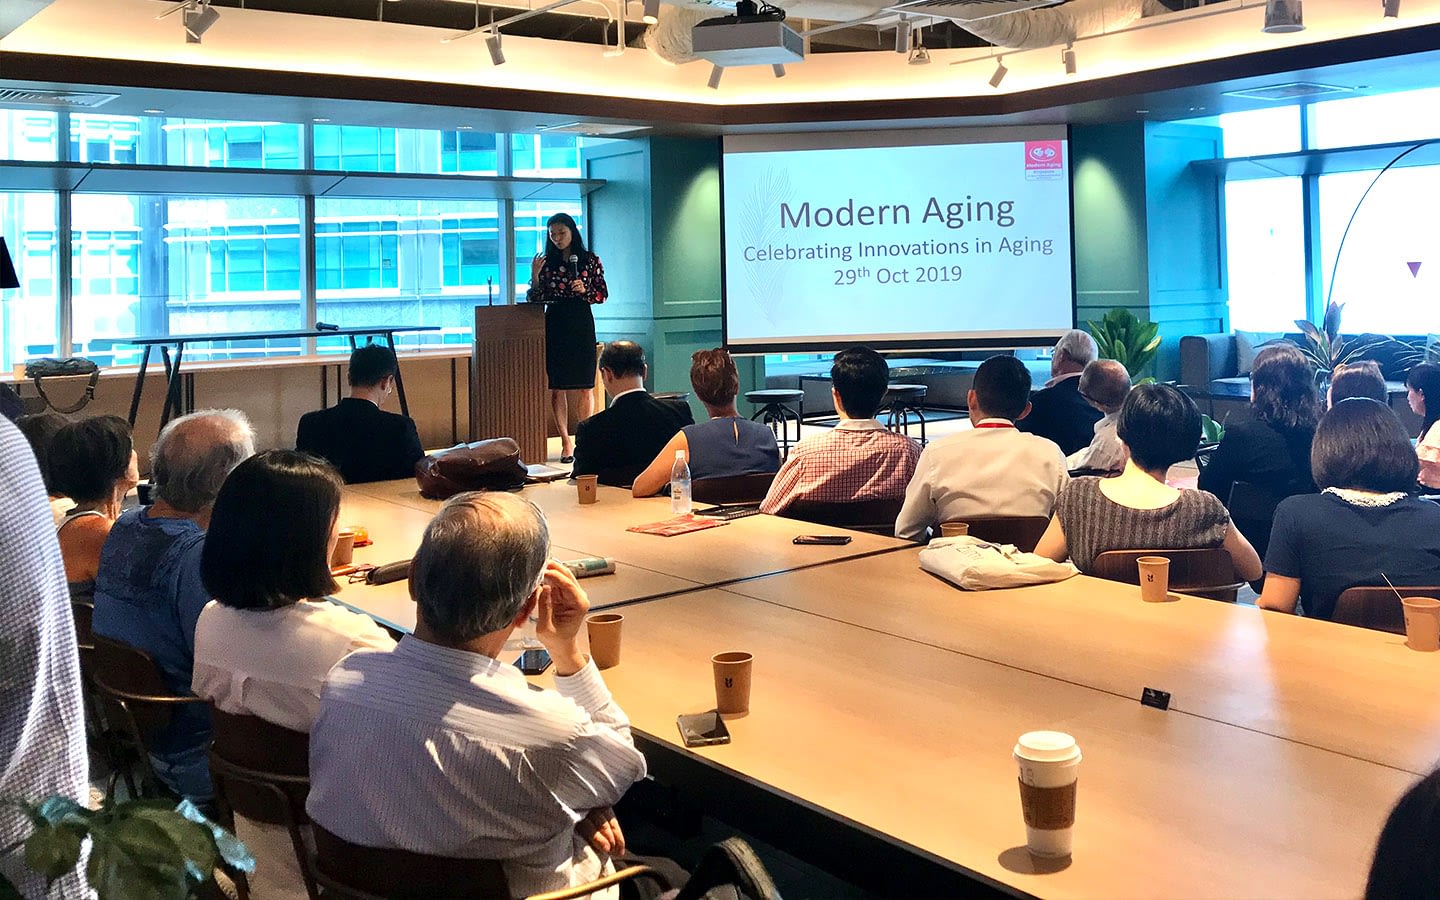 Modern Aging Networking Night: Celebrating Innovations in Aging